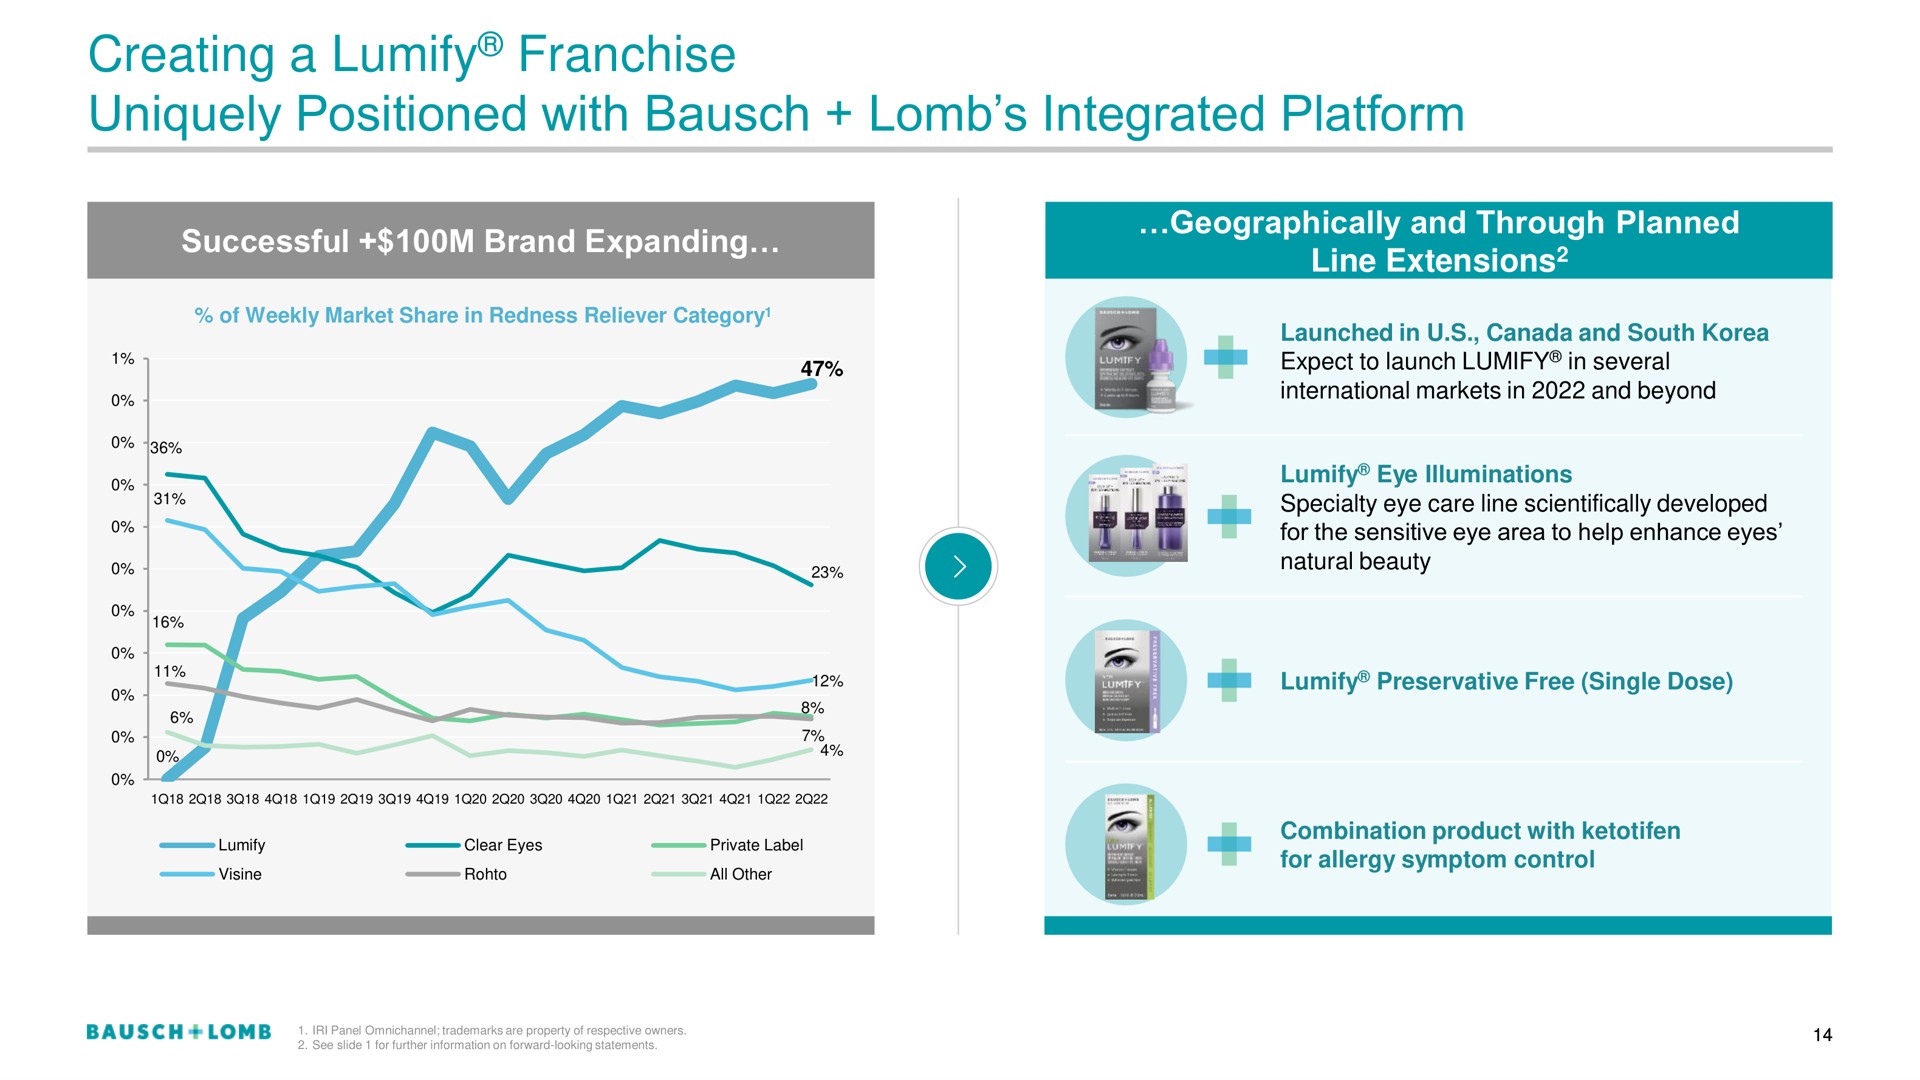 creating a franchise uniquely positioned with integrated platform successful brand expanding | Bausch+Lomb